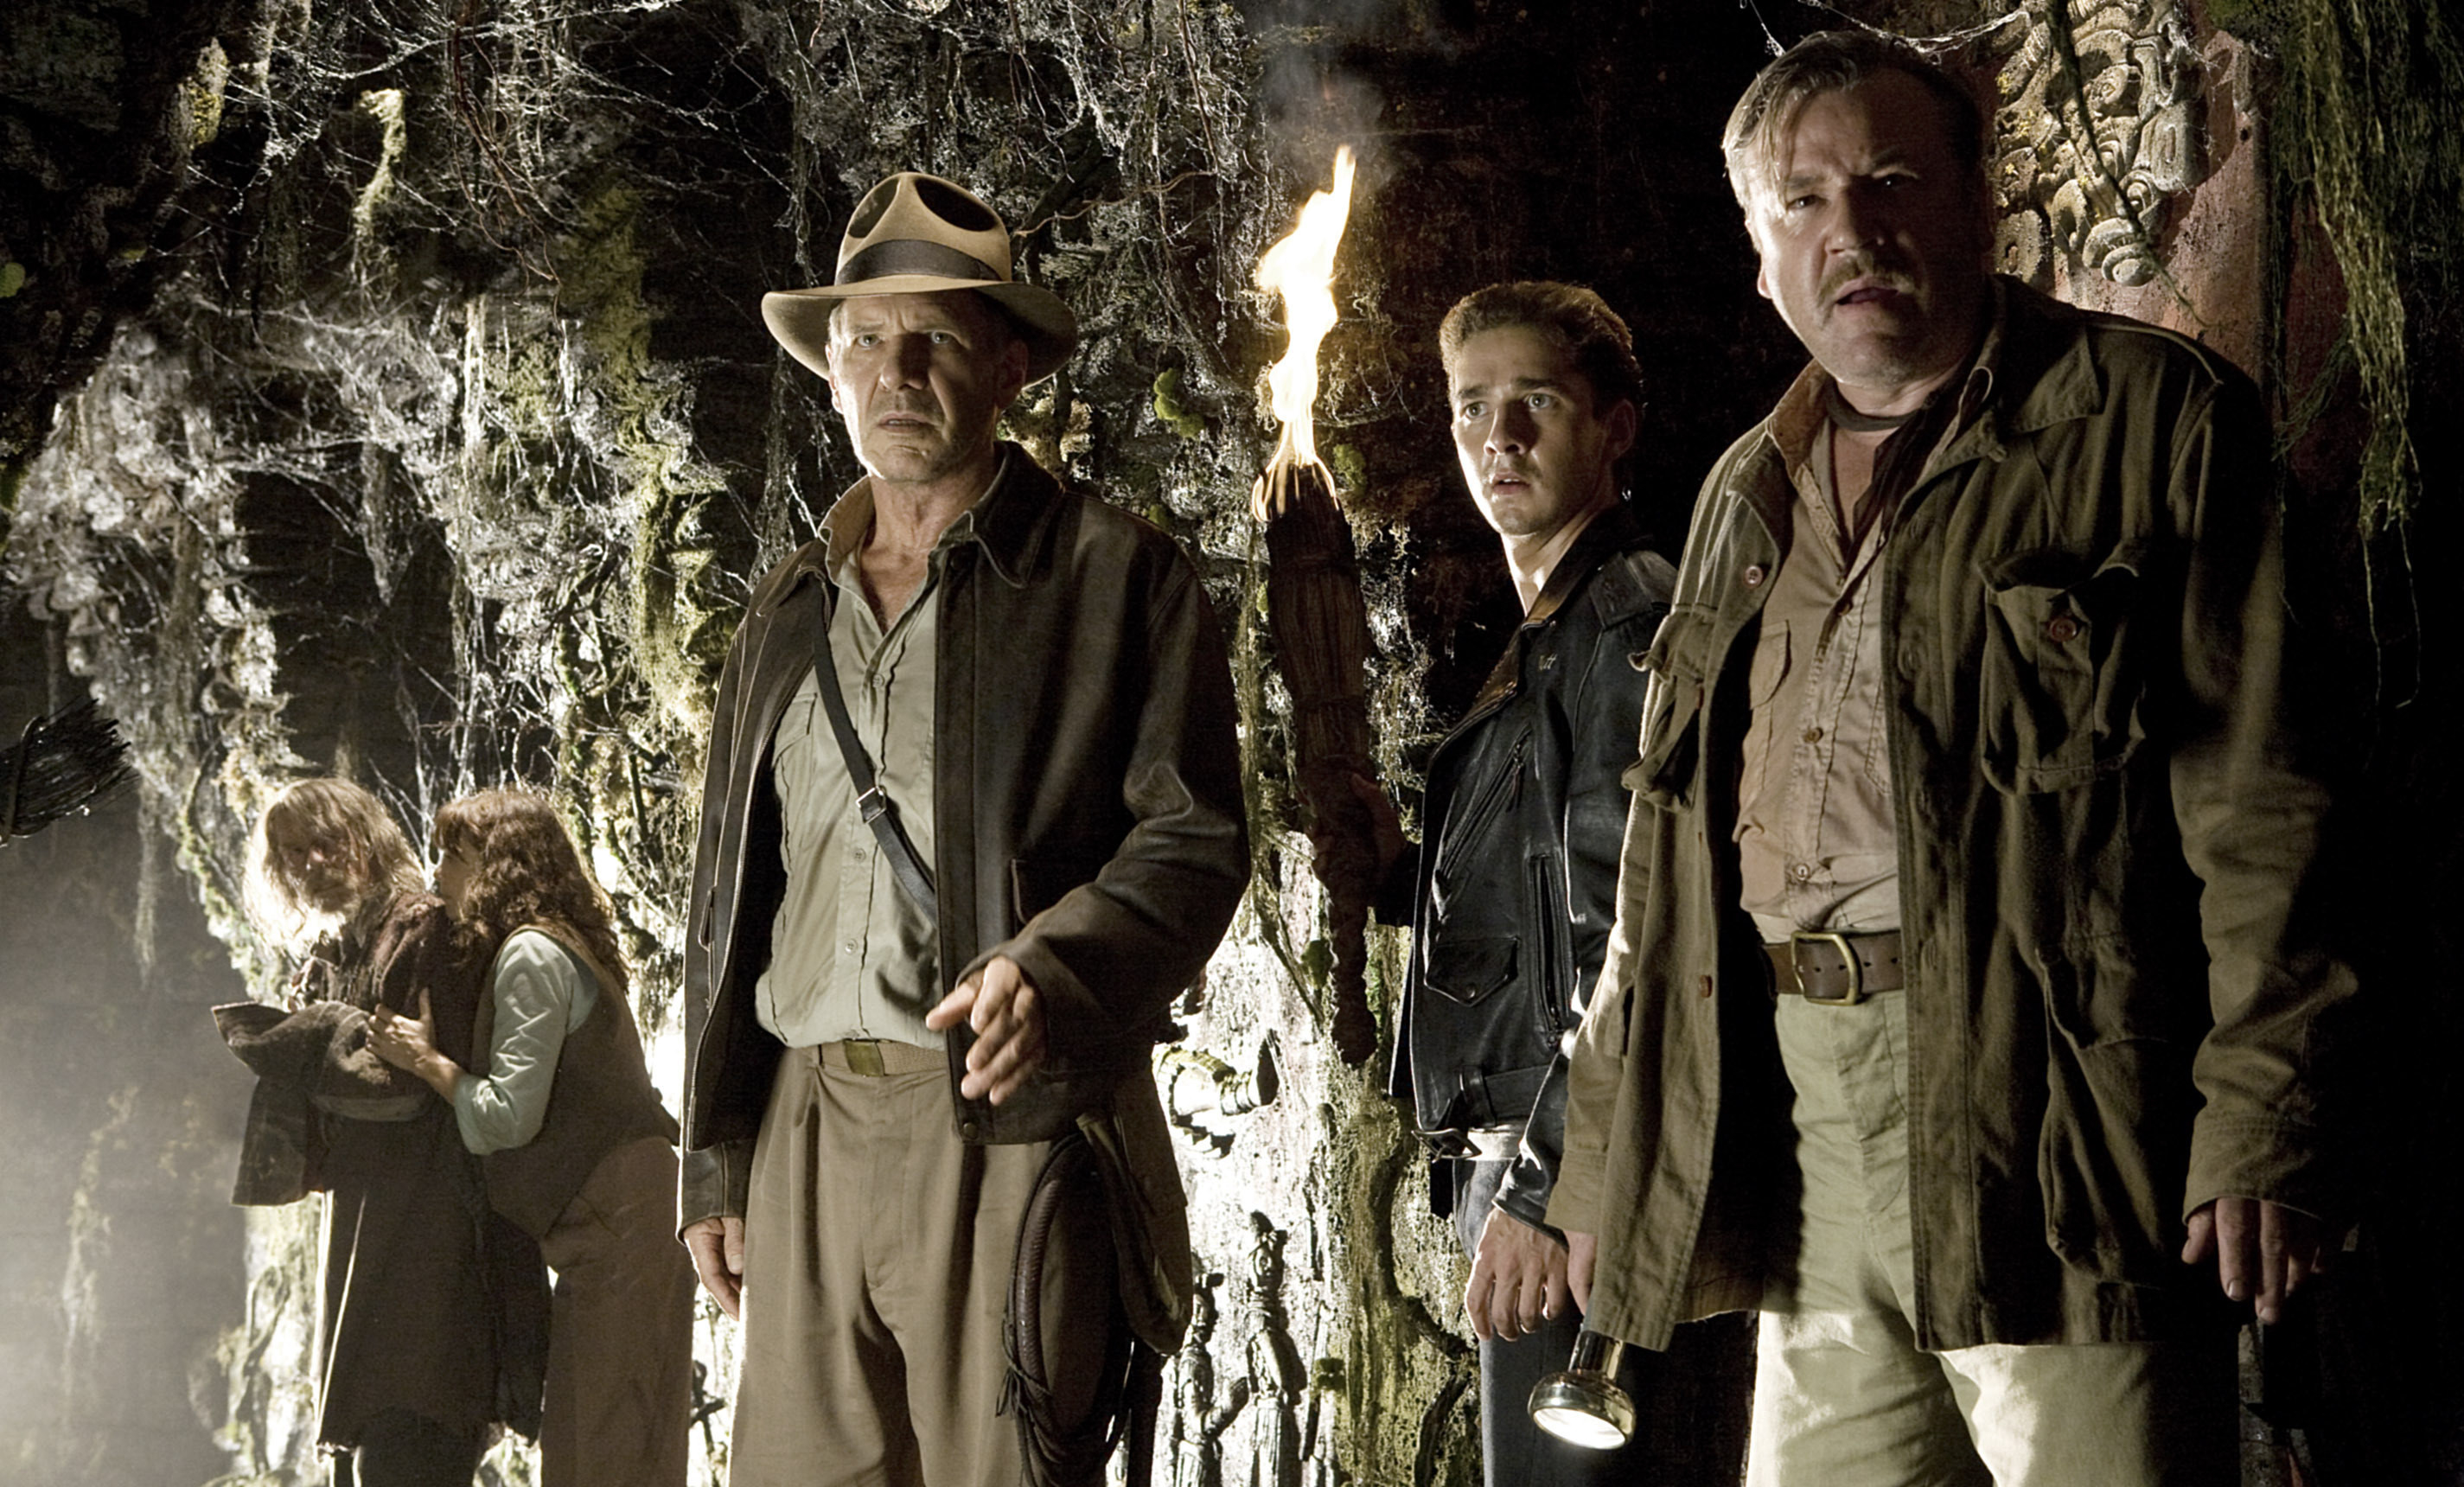 Indiana Jones with others looking concerned in &quot;Indiana Jones and the Kingdom of the Crystal Skull&quot;